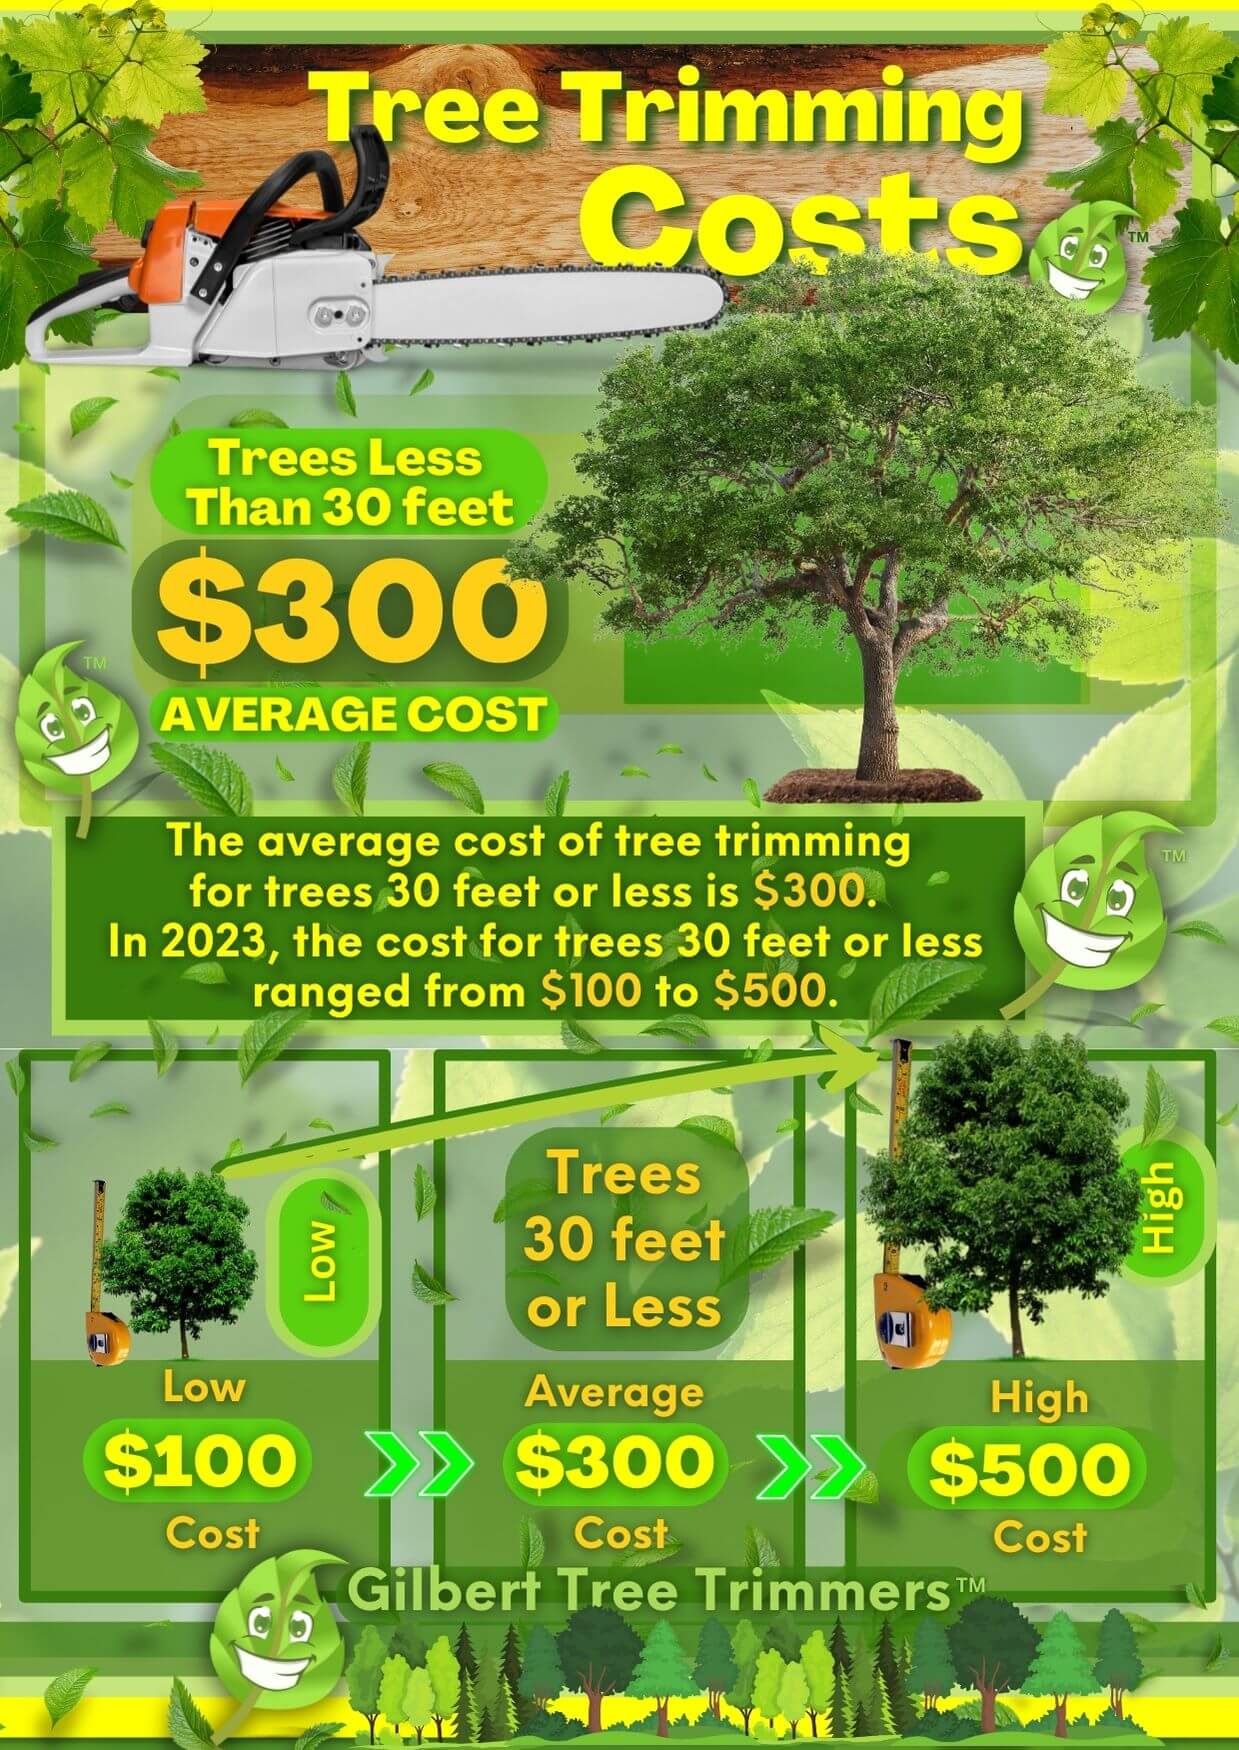 An Infographic showing tree trimming costs for Low, Average and High Costs for trimming trees 30 feet or less.